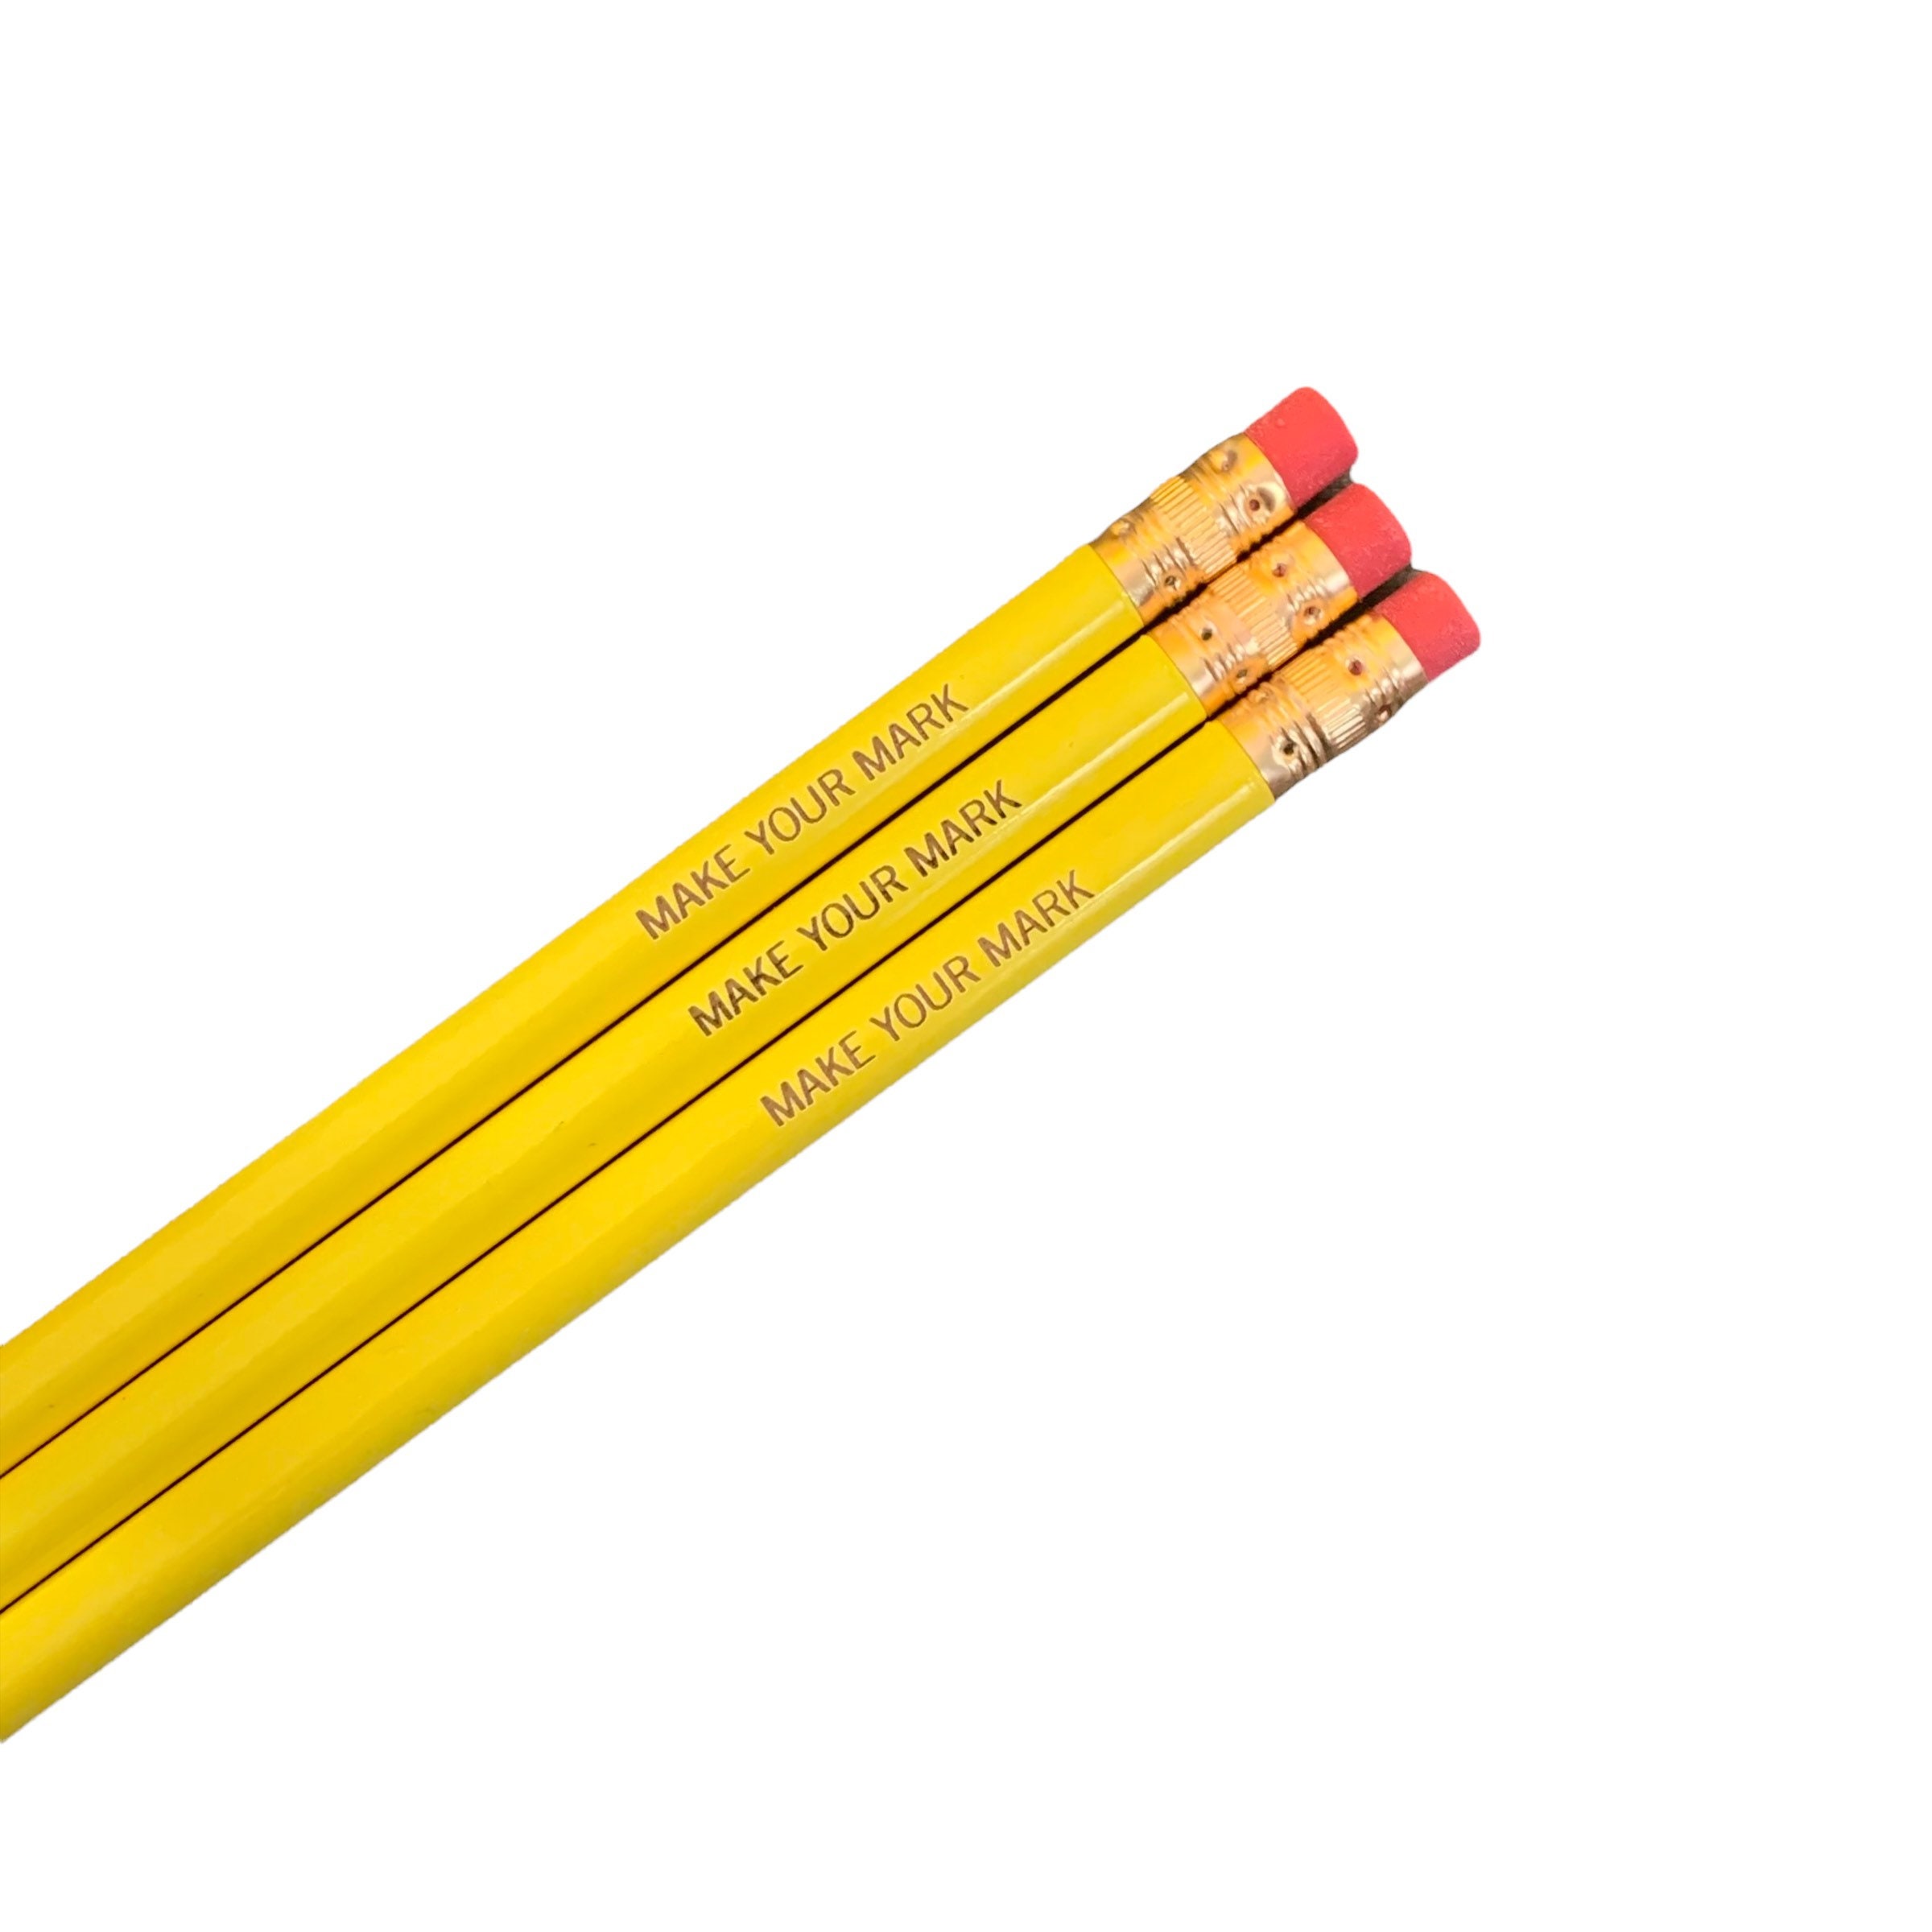 Make Your Mark Personalized Pencil Set 3 Pencils in Yellow. Make a